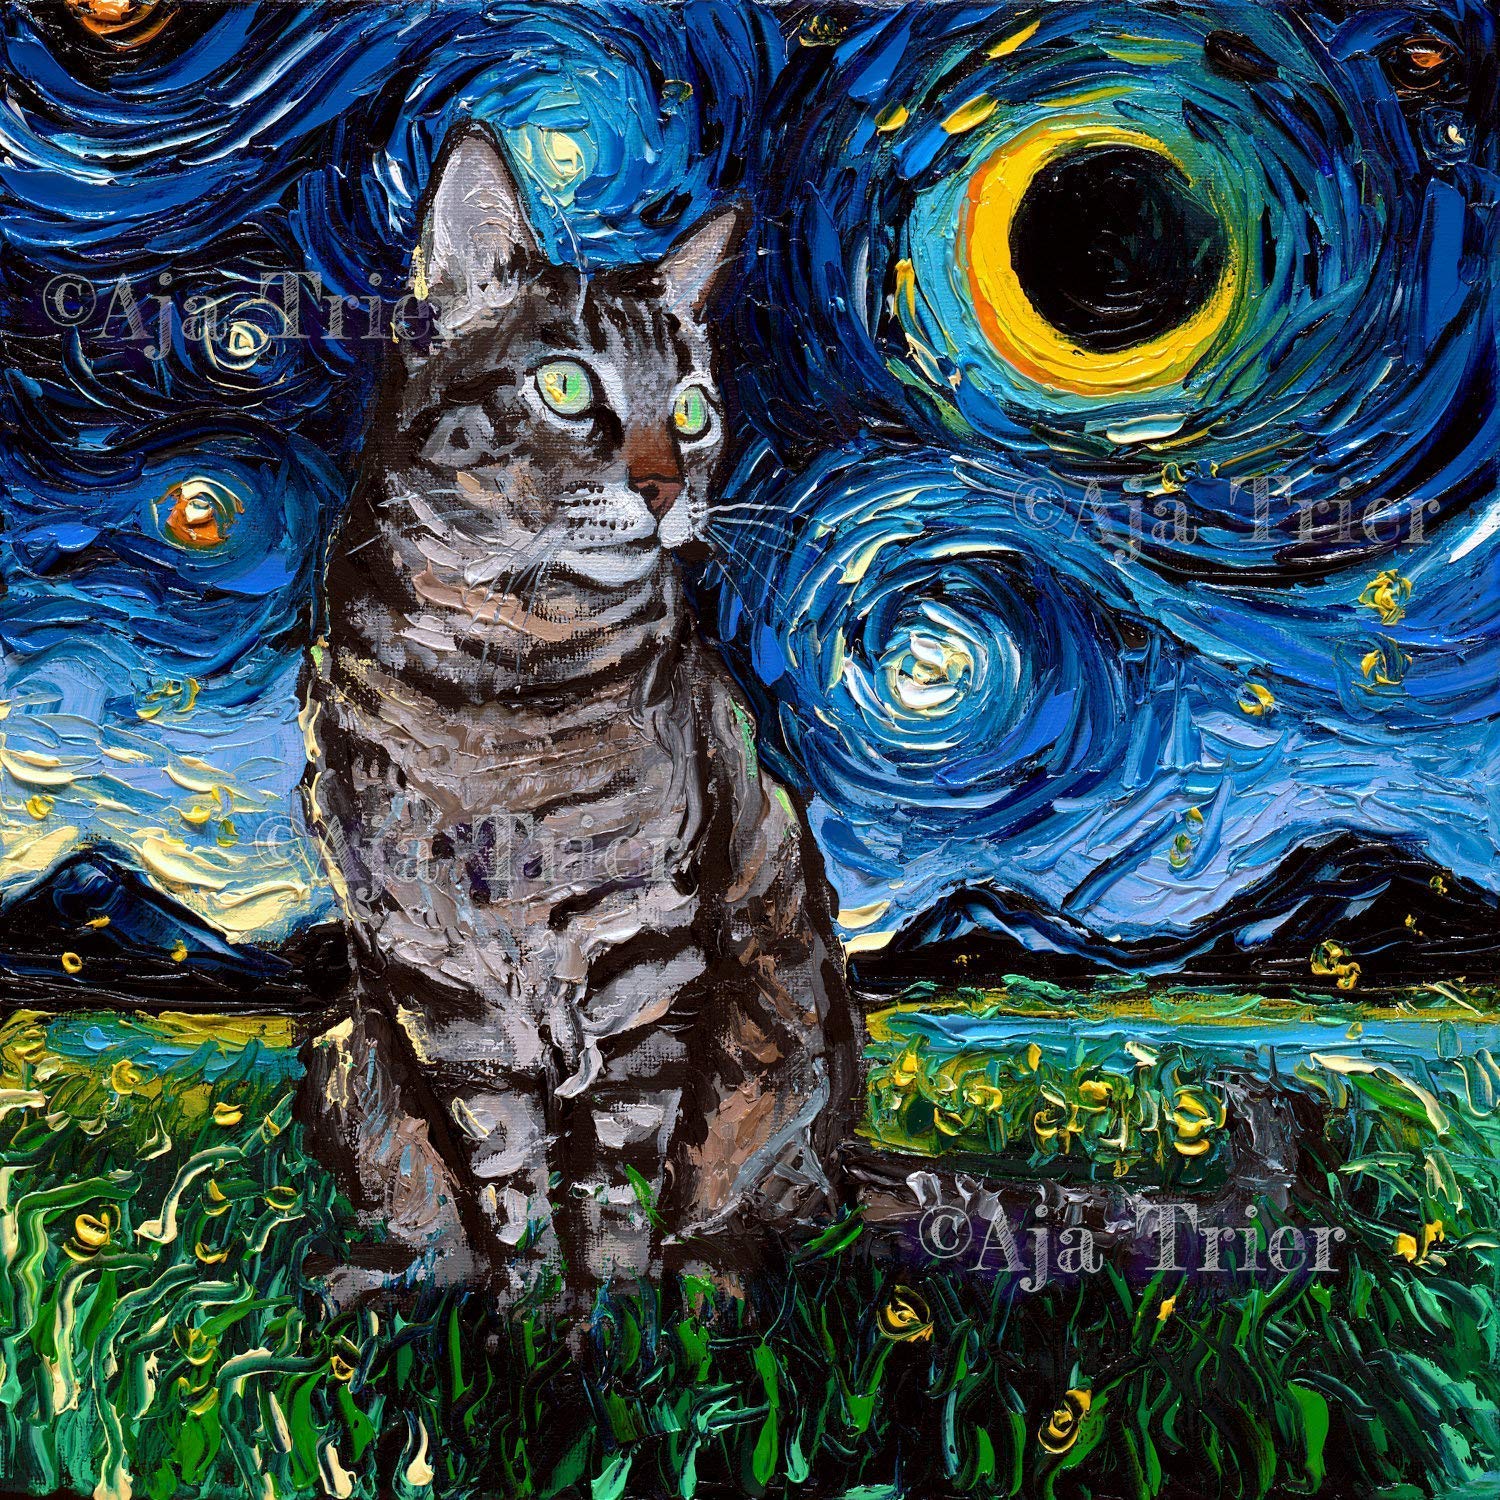 A simple image that would suit the subheading title Biblical and Celestial Symbolism in Cat Dreams would be a cat sleeping under a starry sky.